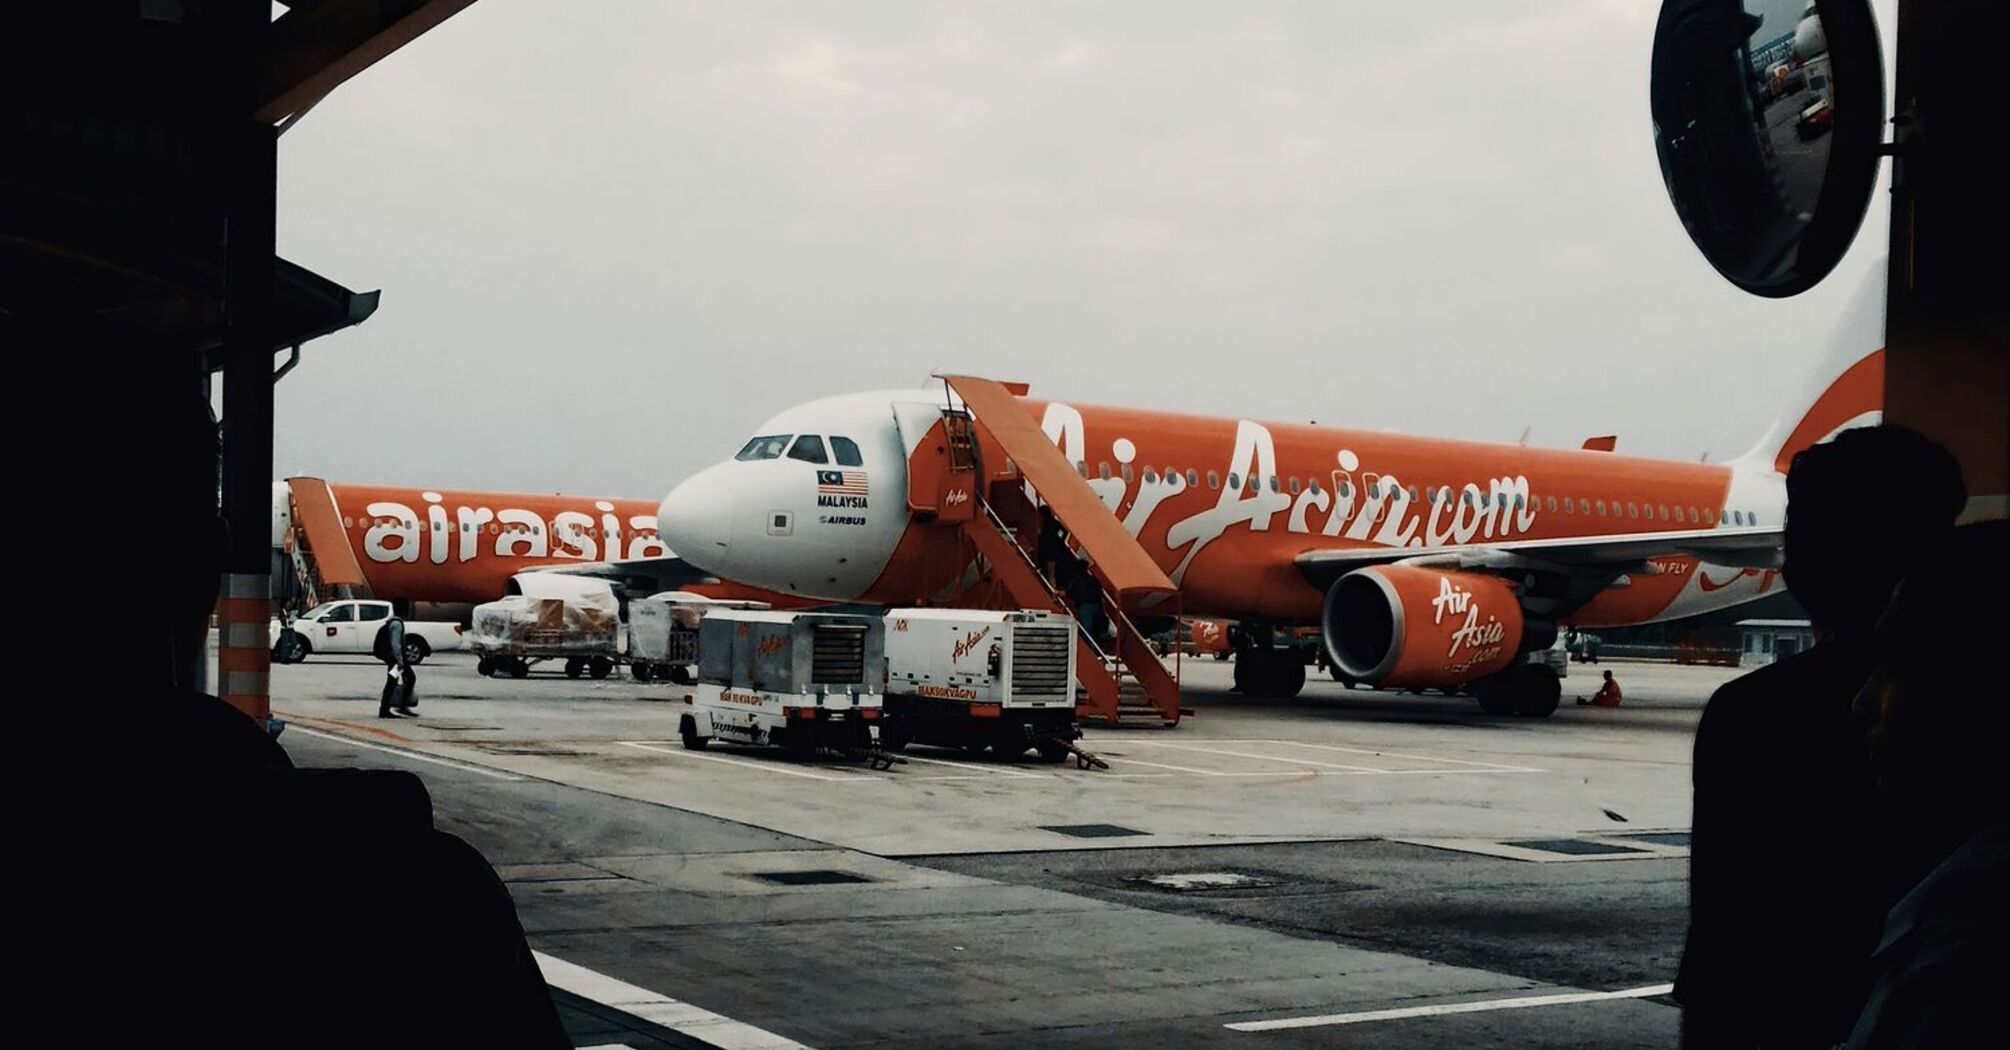 AirAsia aircraft at boarding gate with overcast skies